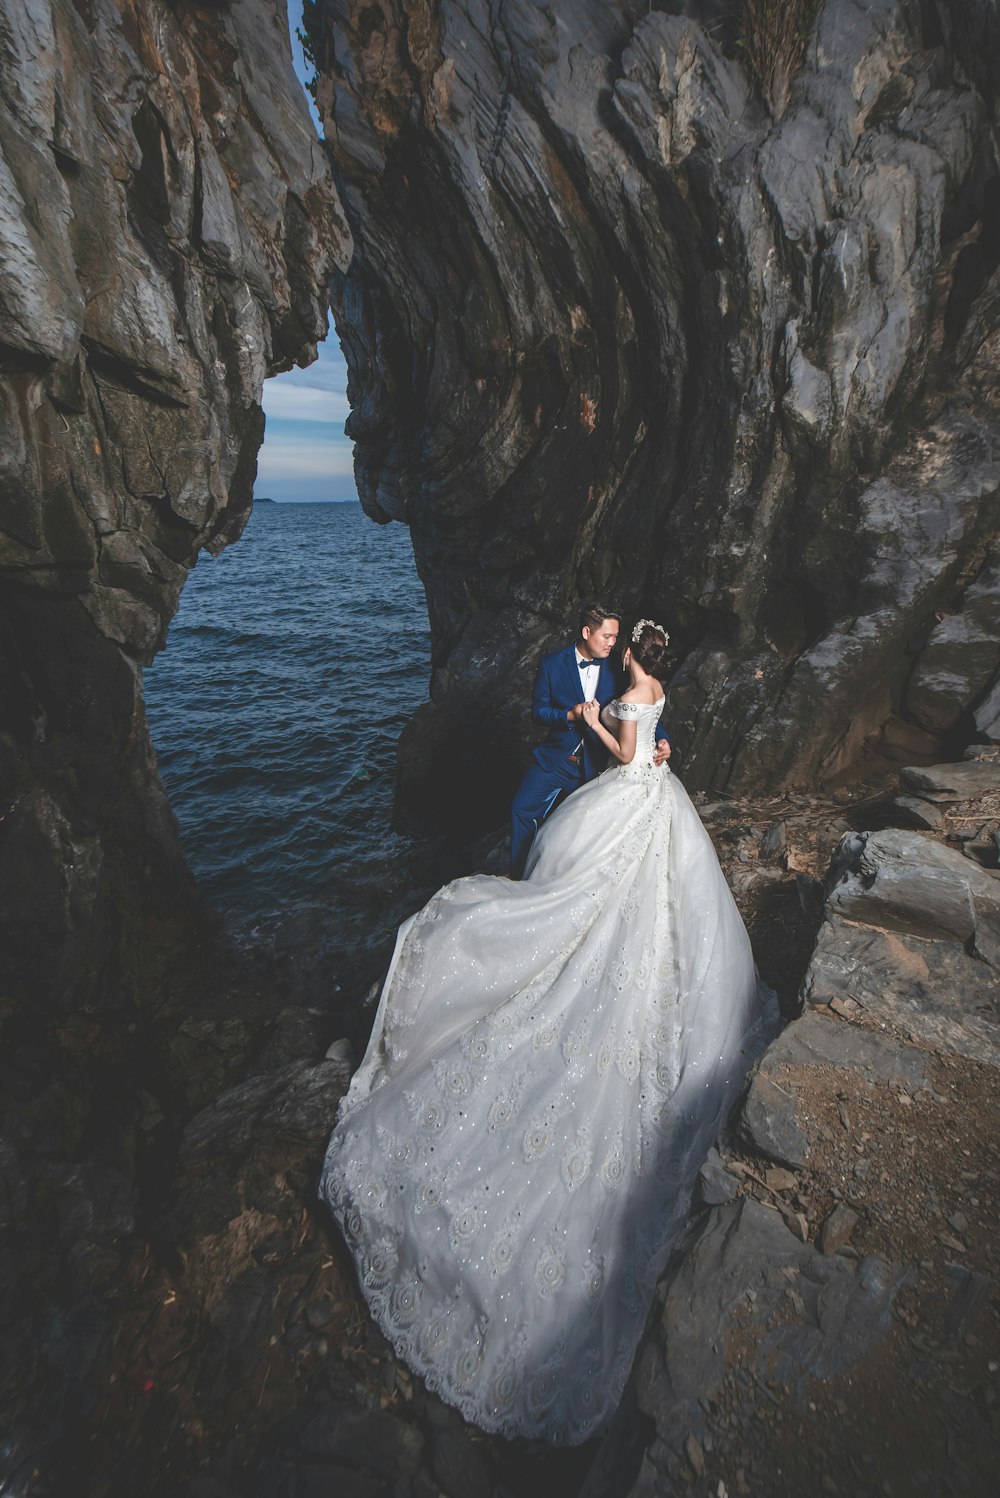 man and woman in wedding dress standing near shore